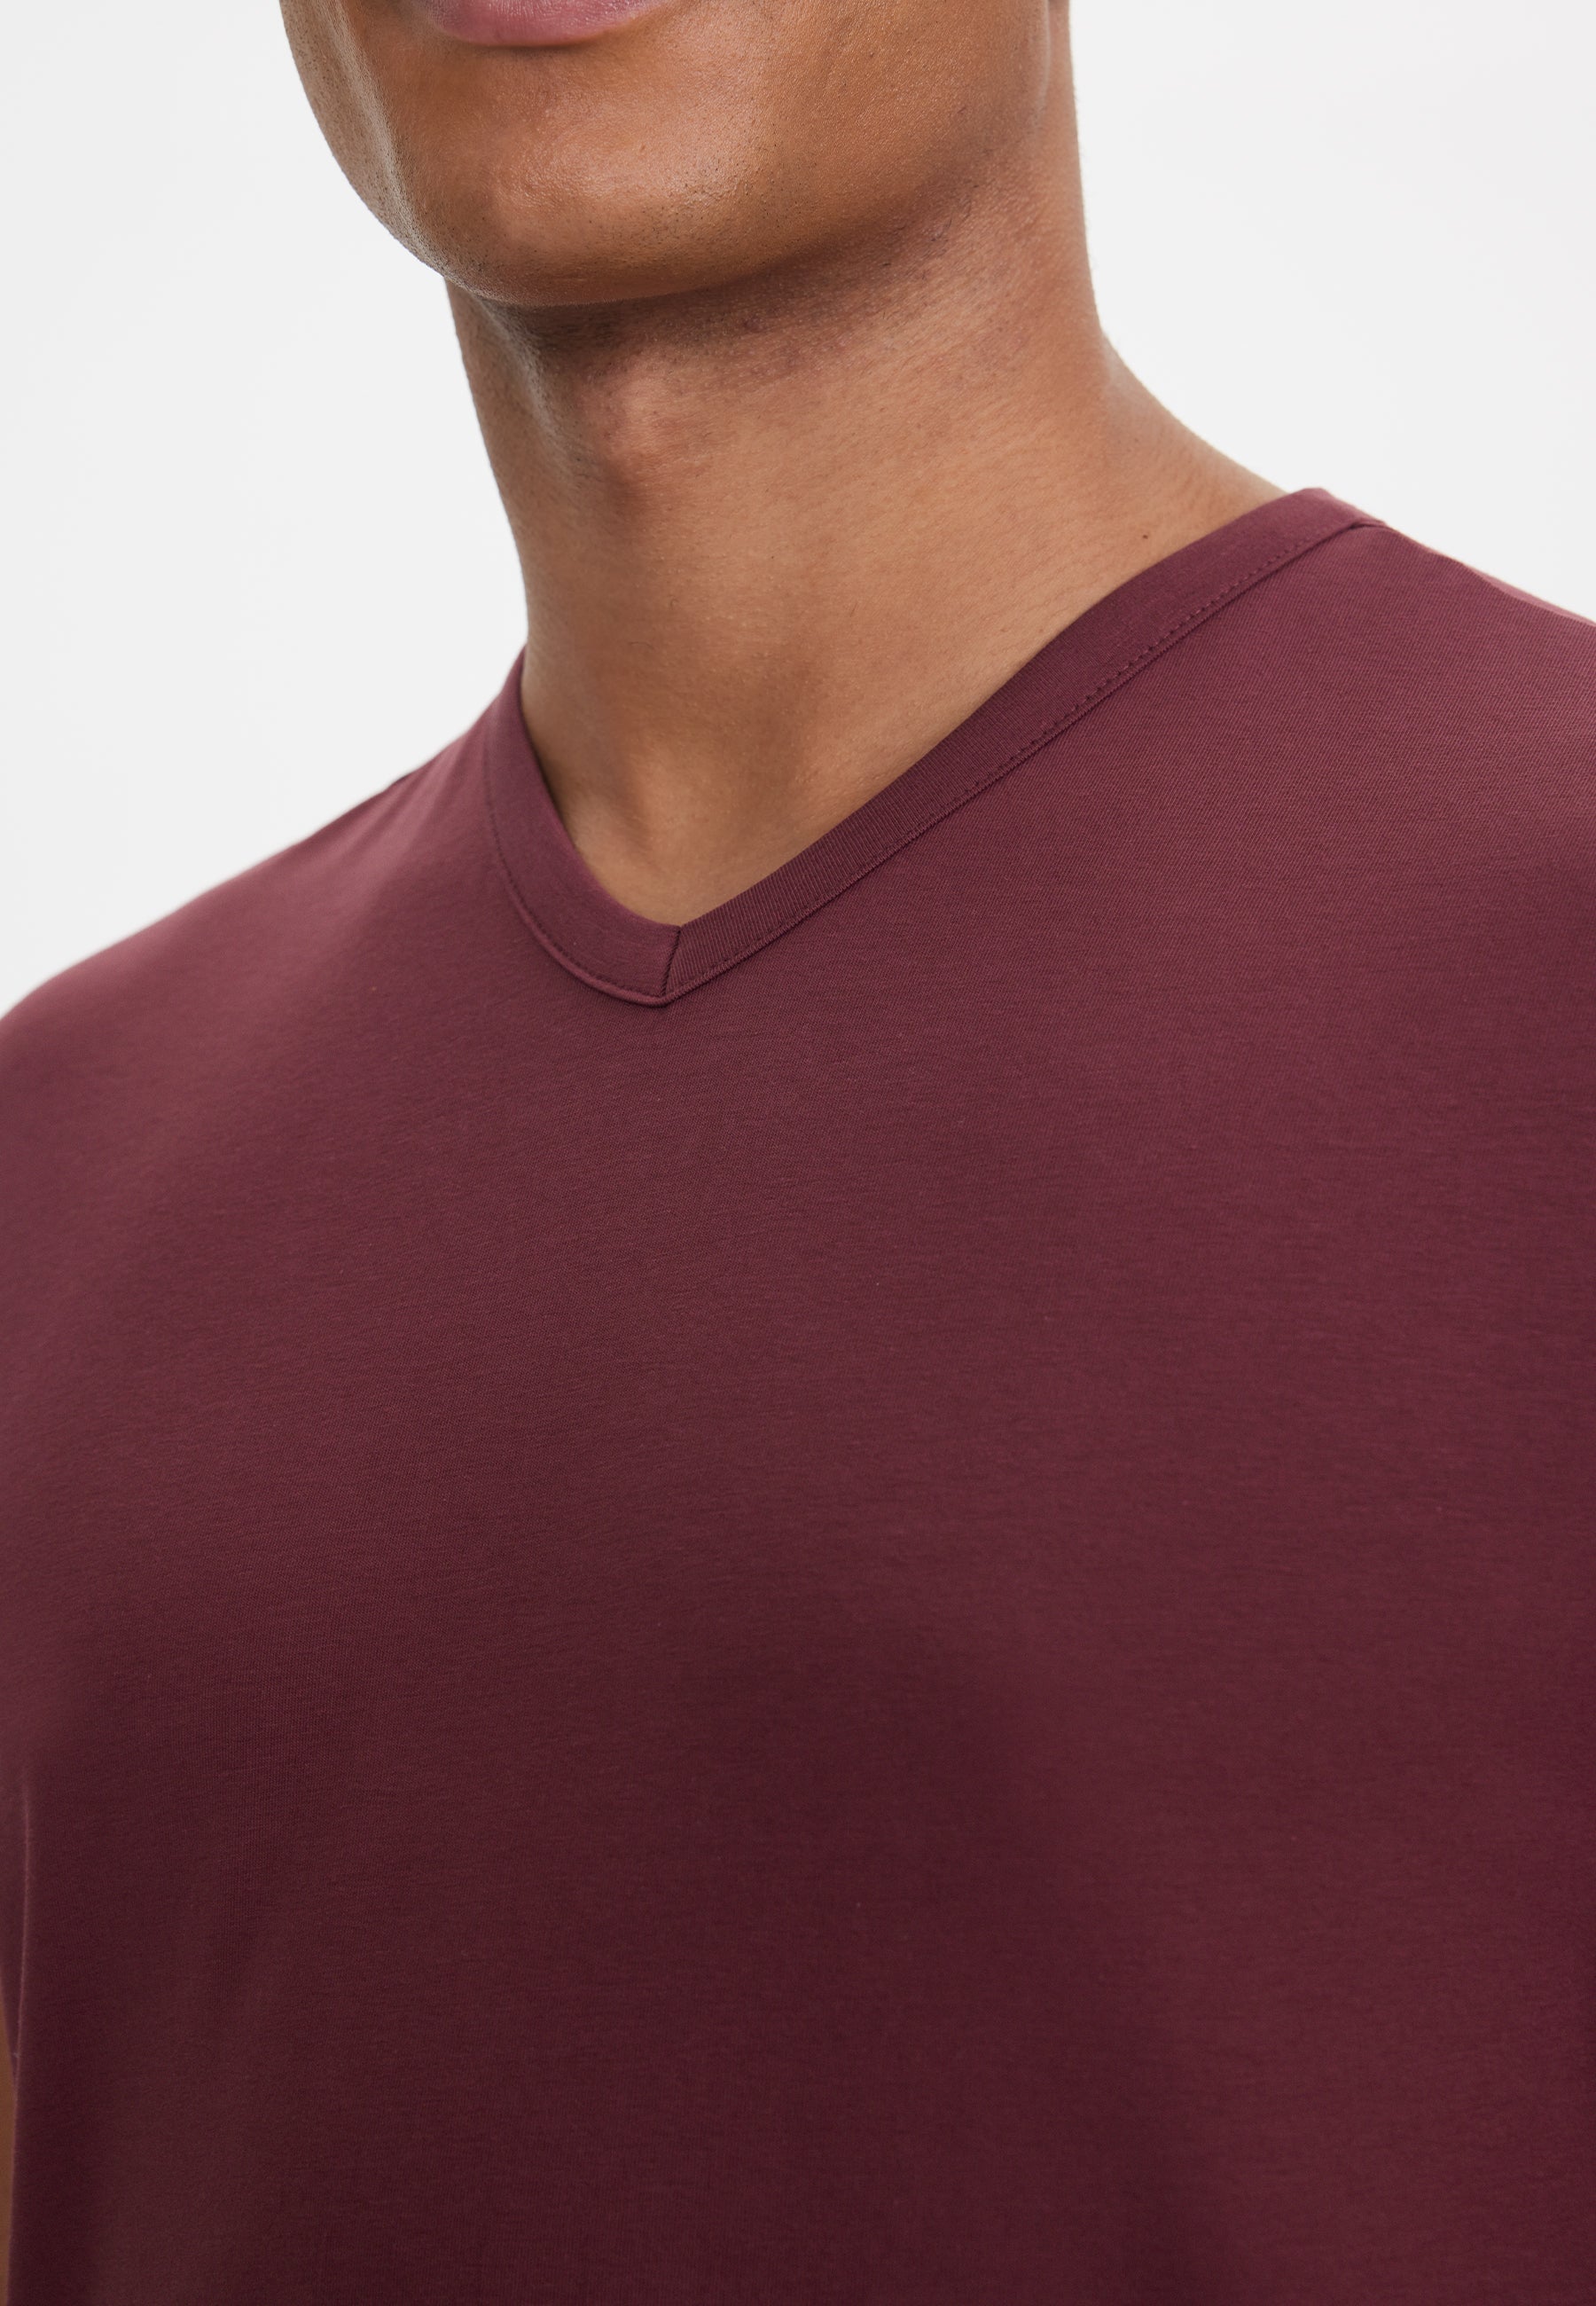 THEO V-NECK TEE in Bordeaux